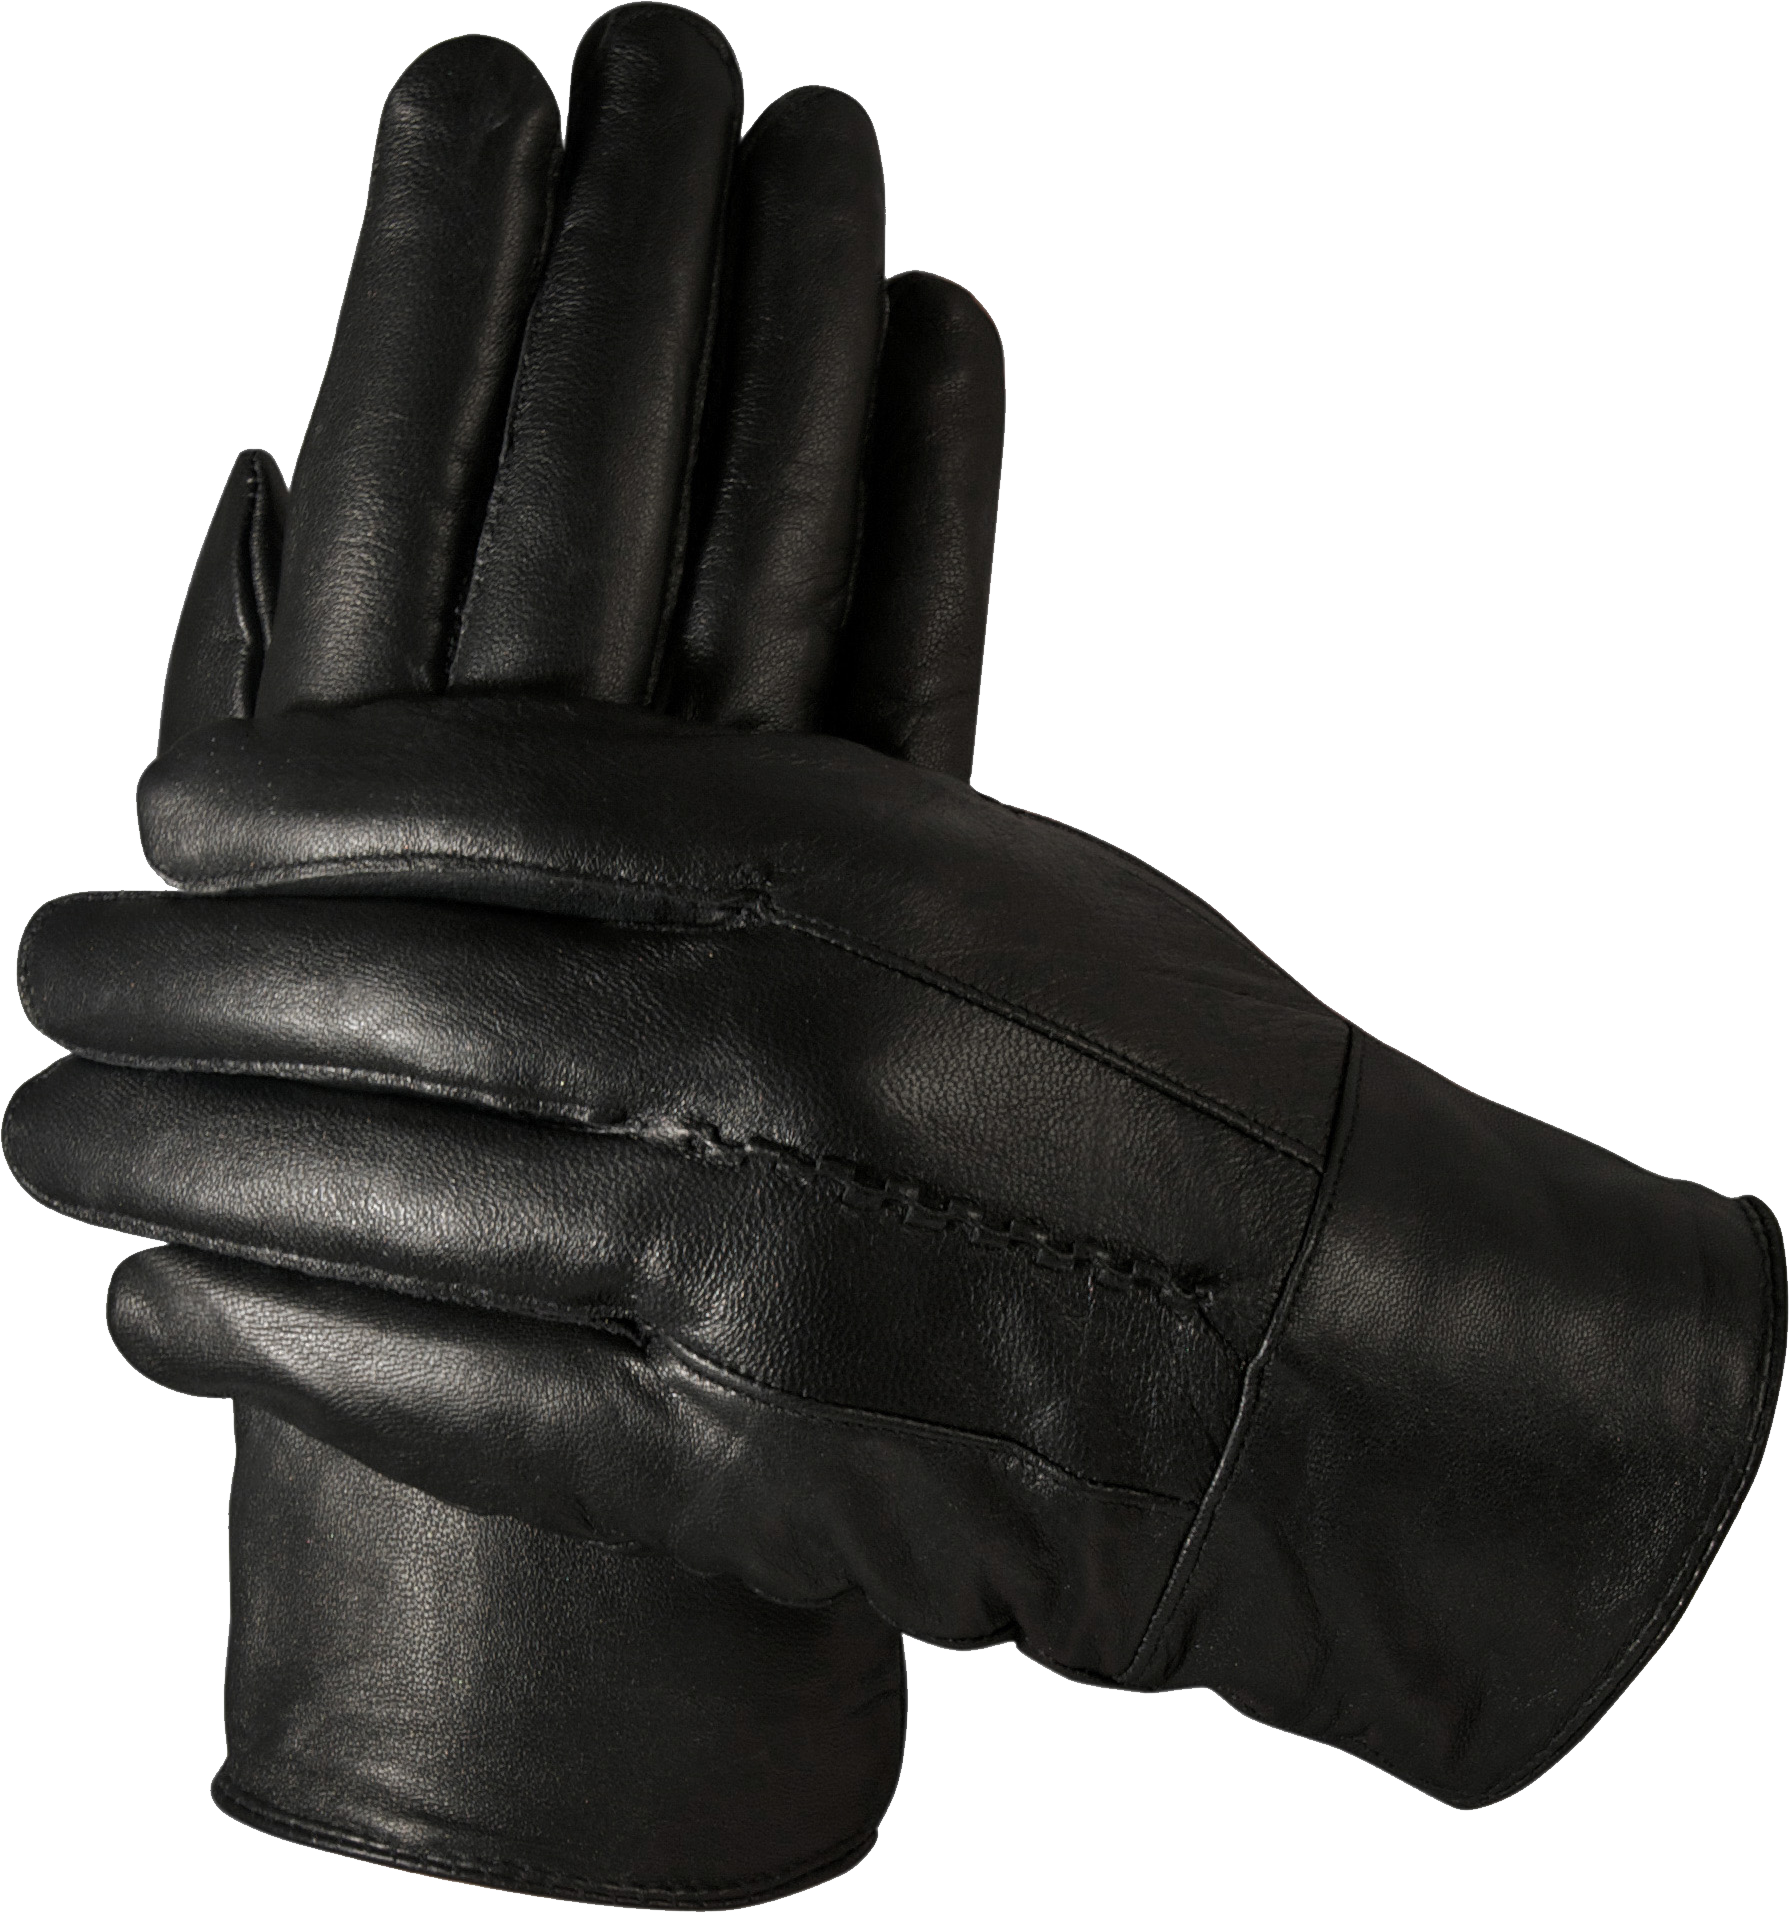 Leather Gloves Png Image - Gloves, Transparent background PNG HD thumbnail